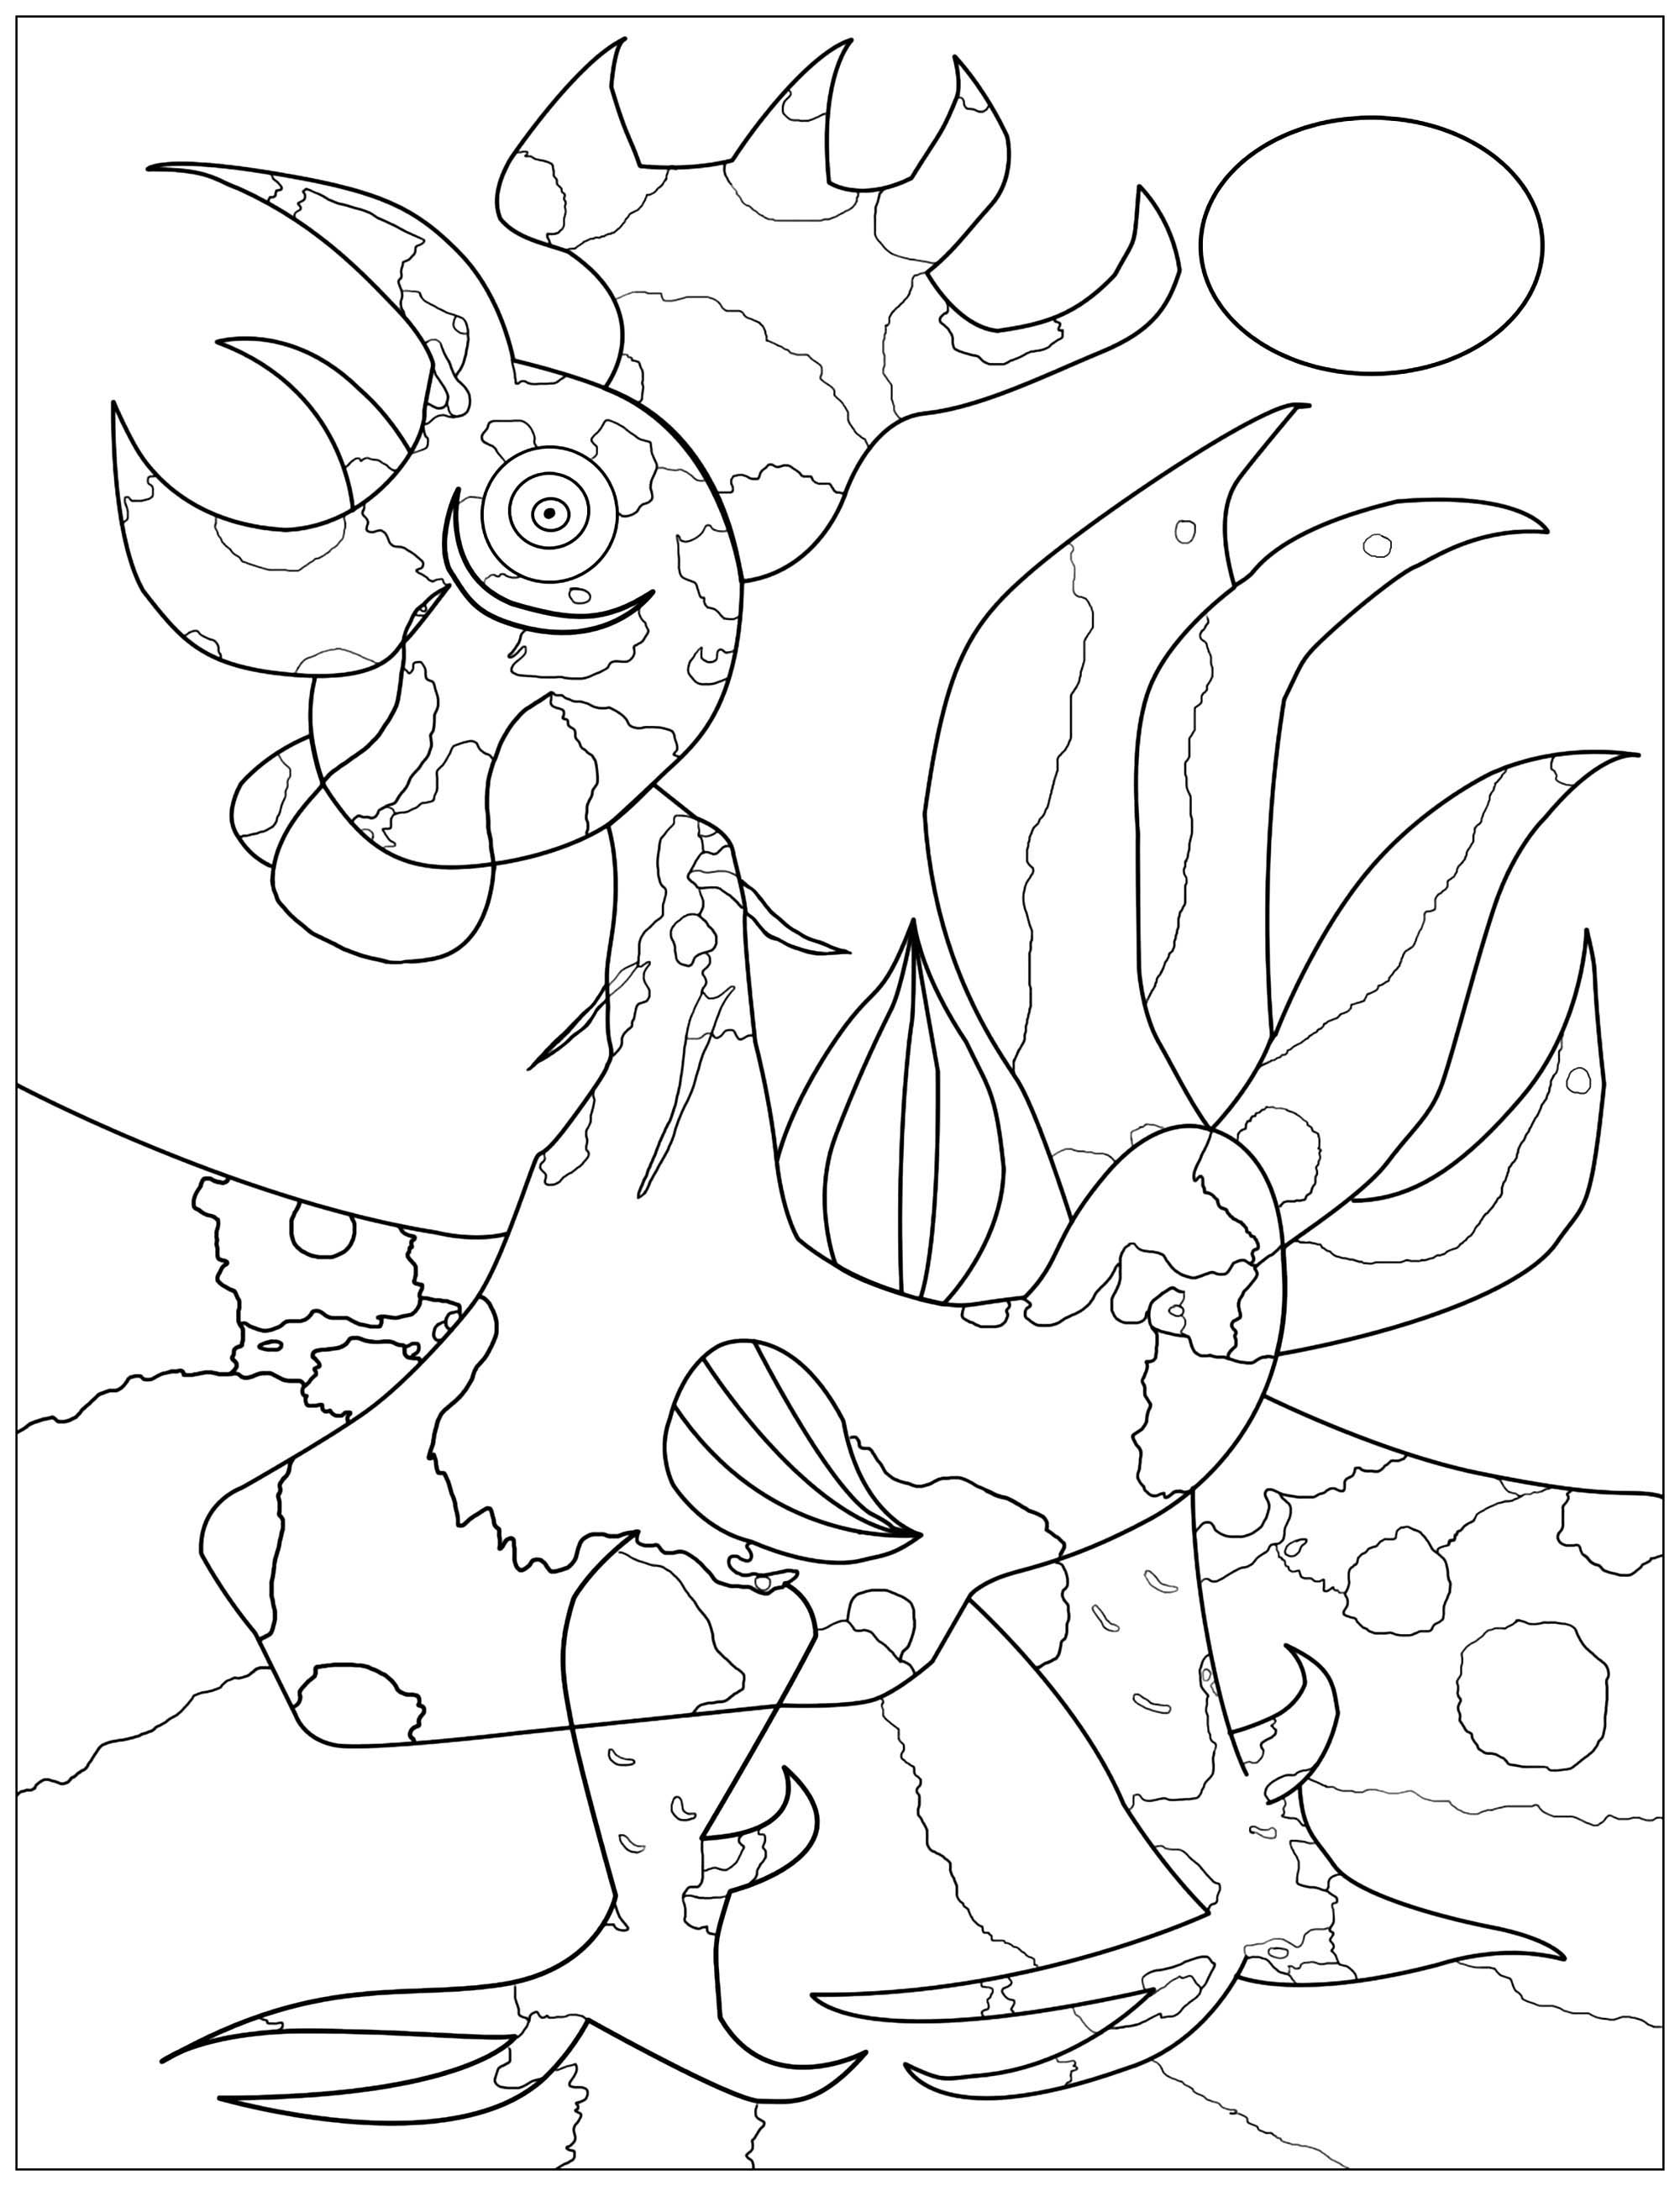 Coloring page inspired by a Joan Miró painting : Le coq (The rooster) (1940), Artist : Olivier